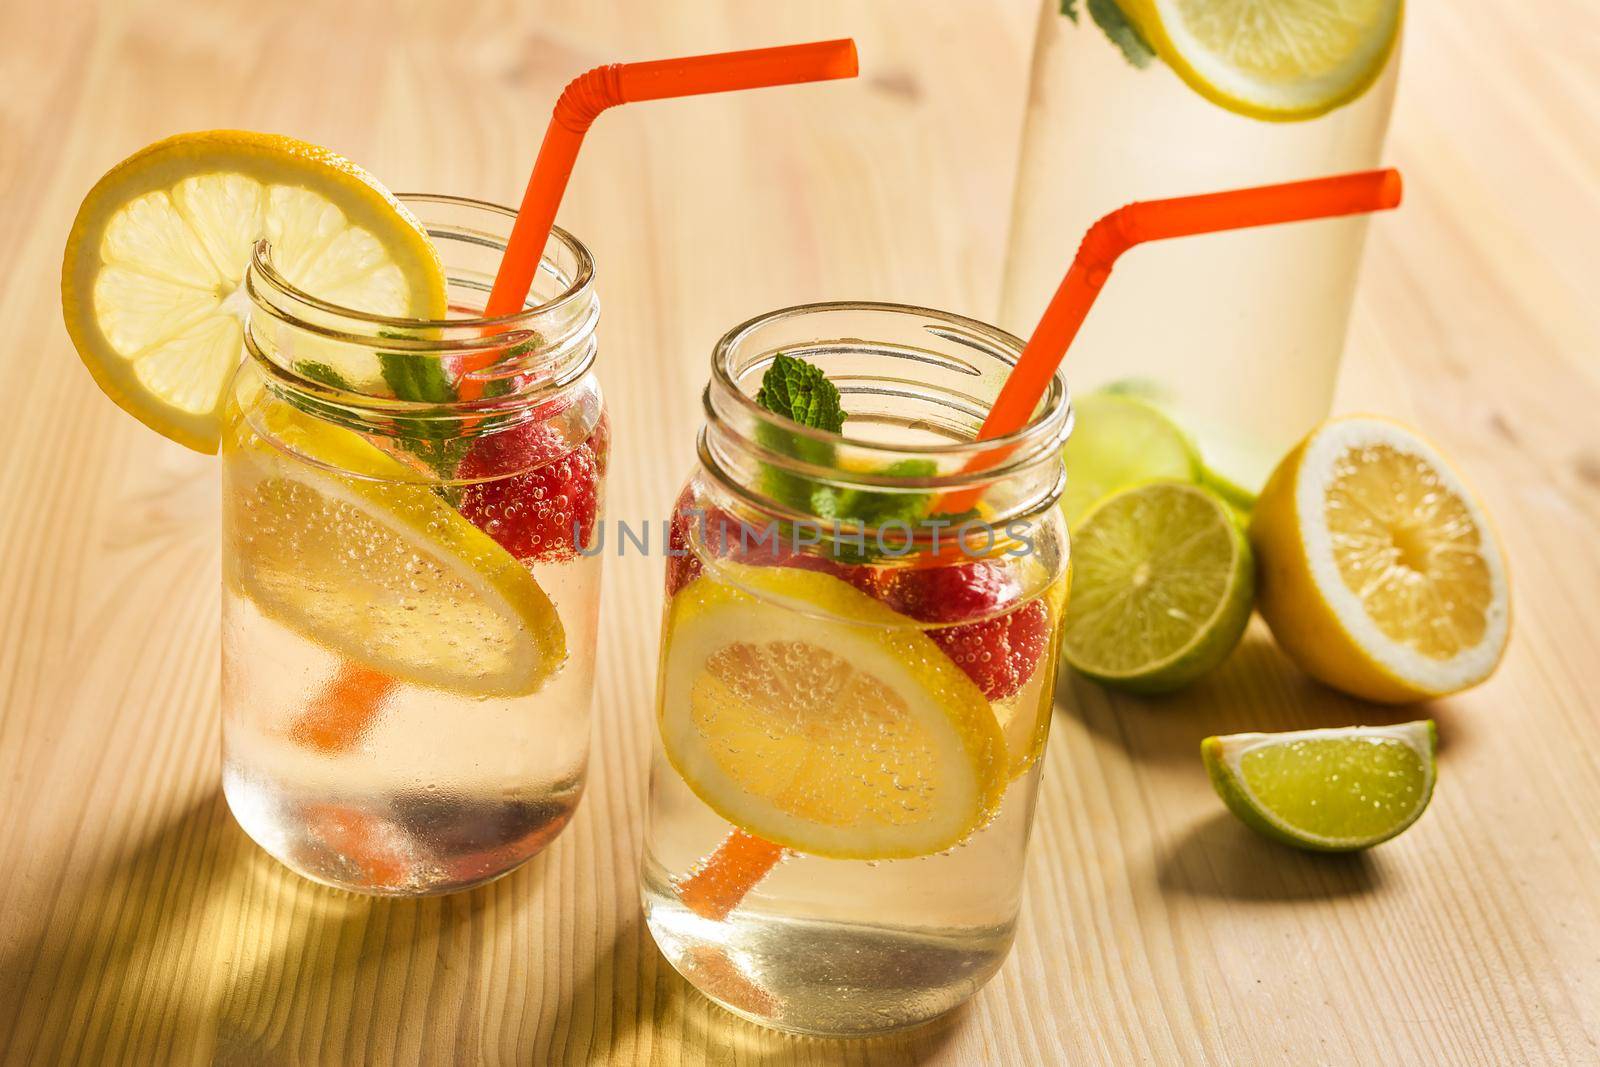 two glass jars and a bottle illuminated by sunlight with refreshing cold lemonade water, lemon slices, red berries, mint leaves and drinking canes on a wooden table. Summer citrus soda background